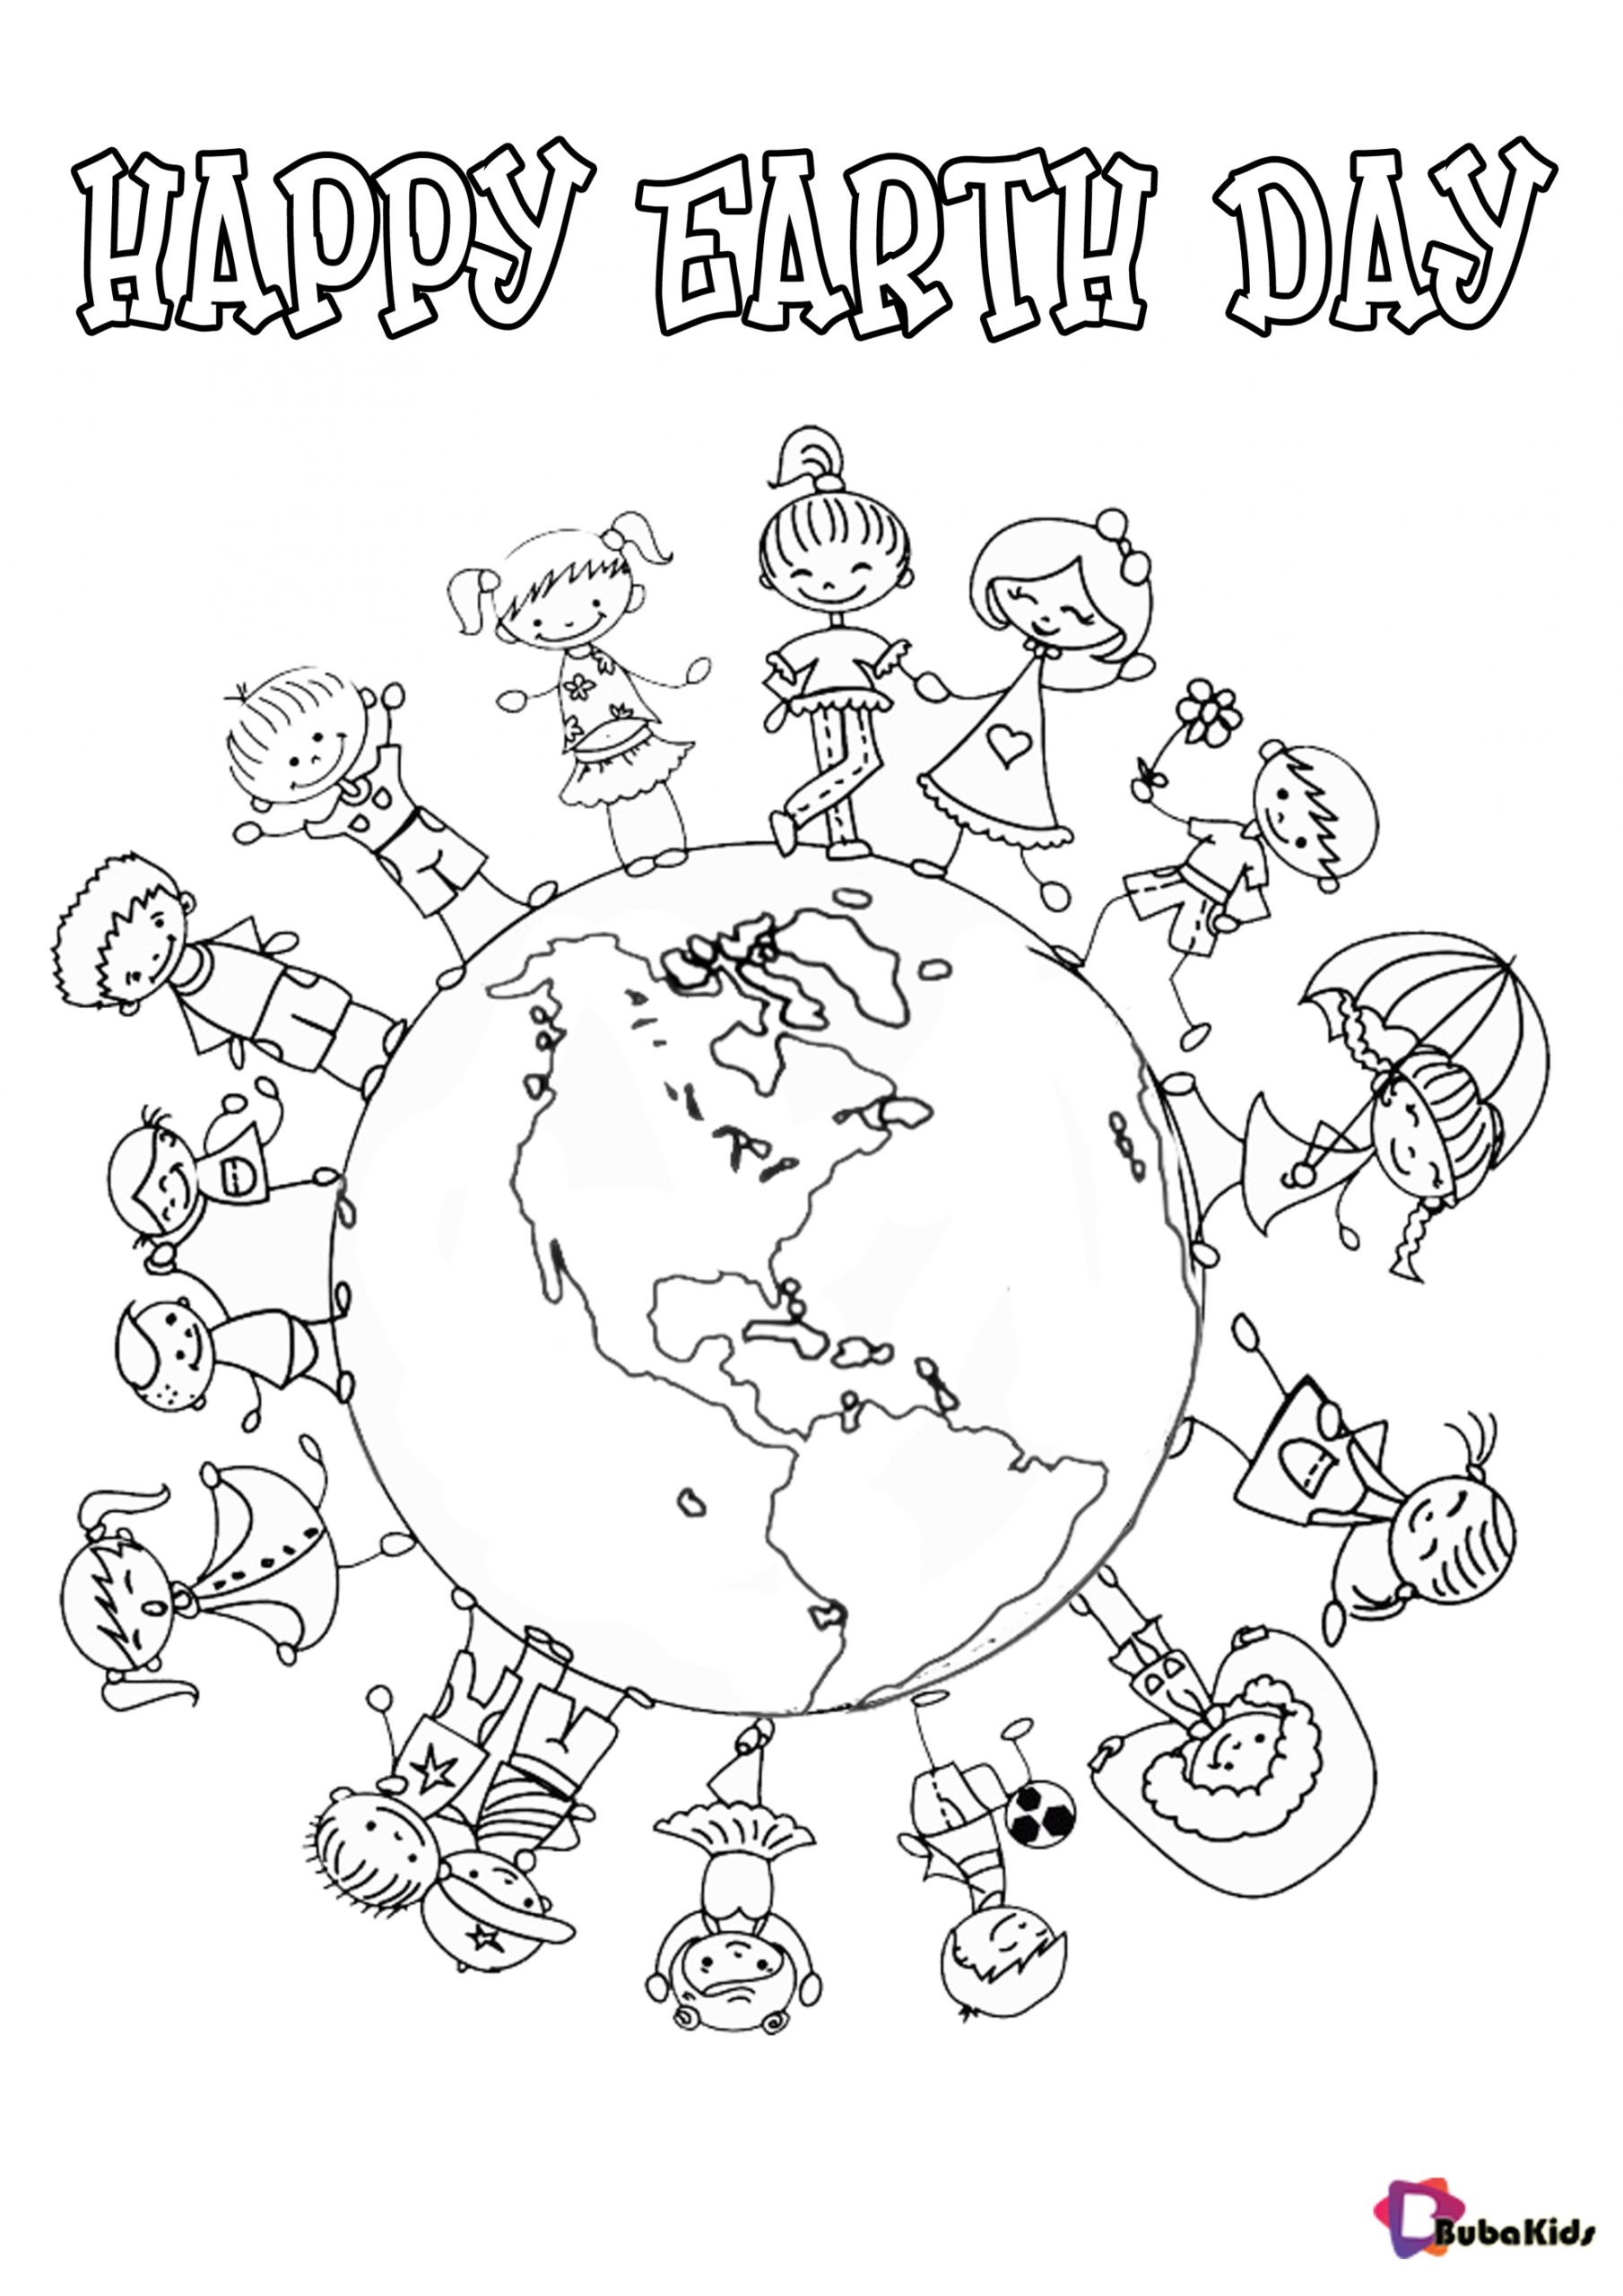 Free download and printable happy earth day colouring sheets Wallpaper